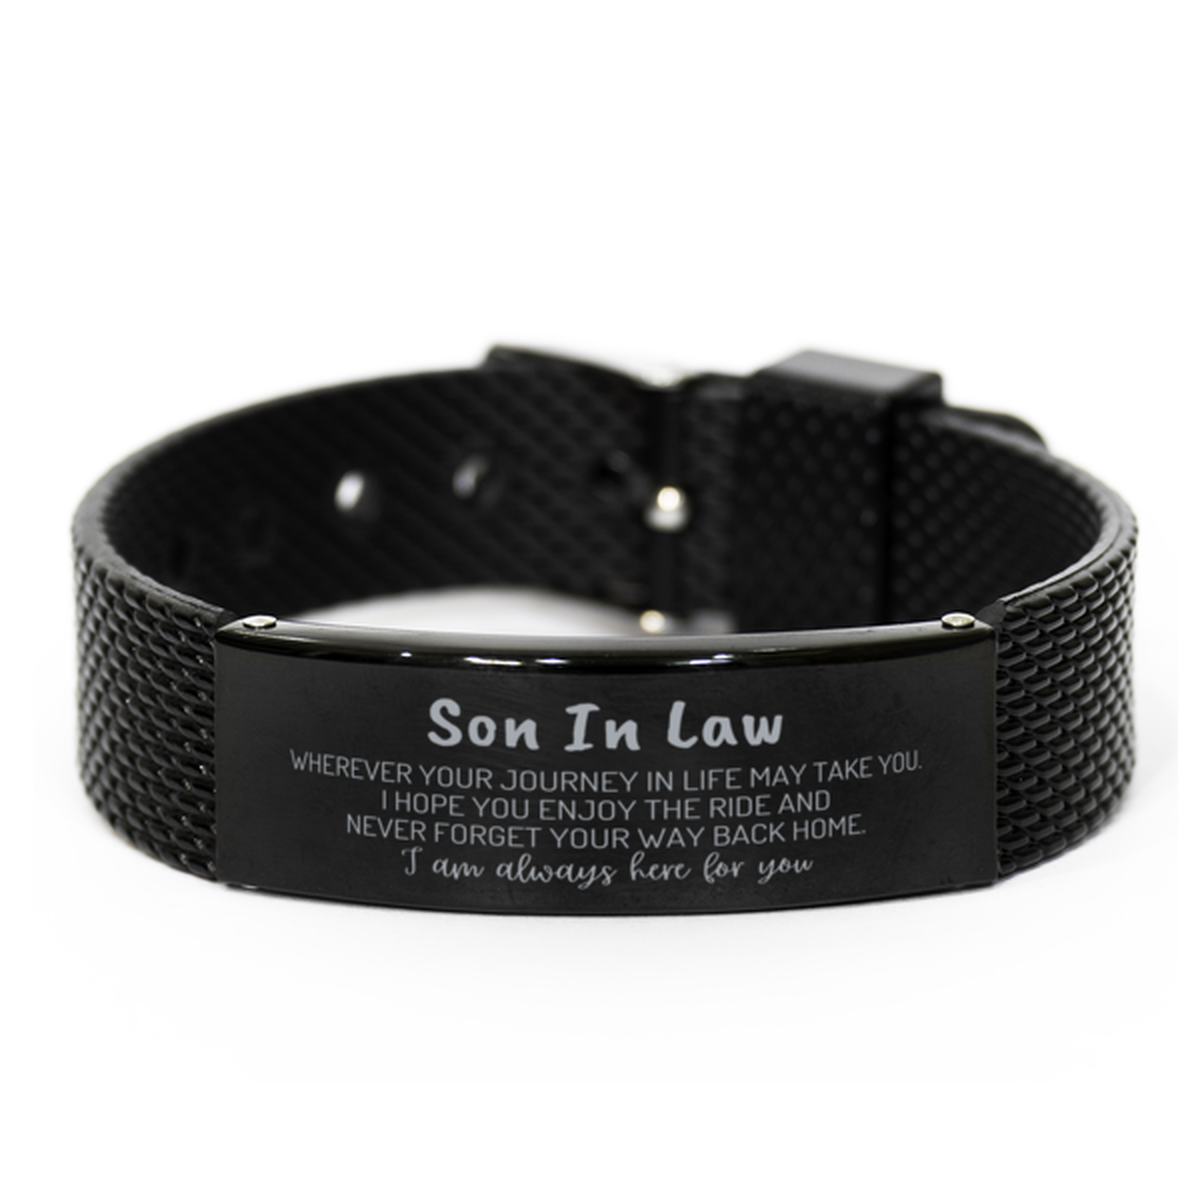 Son In Law wherever your journey in life may take you, I am always here for you Son In Law Black Shark Mesh Bracelet, Awesome Christmas Gifts For Son In Law, Son In Law Birthday Gifts for Men Women Family Loved One